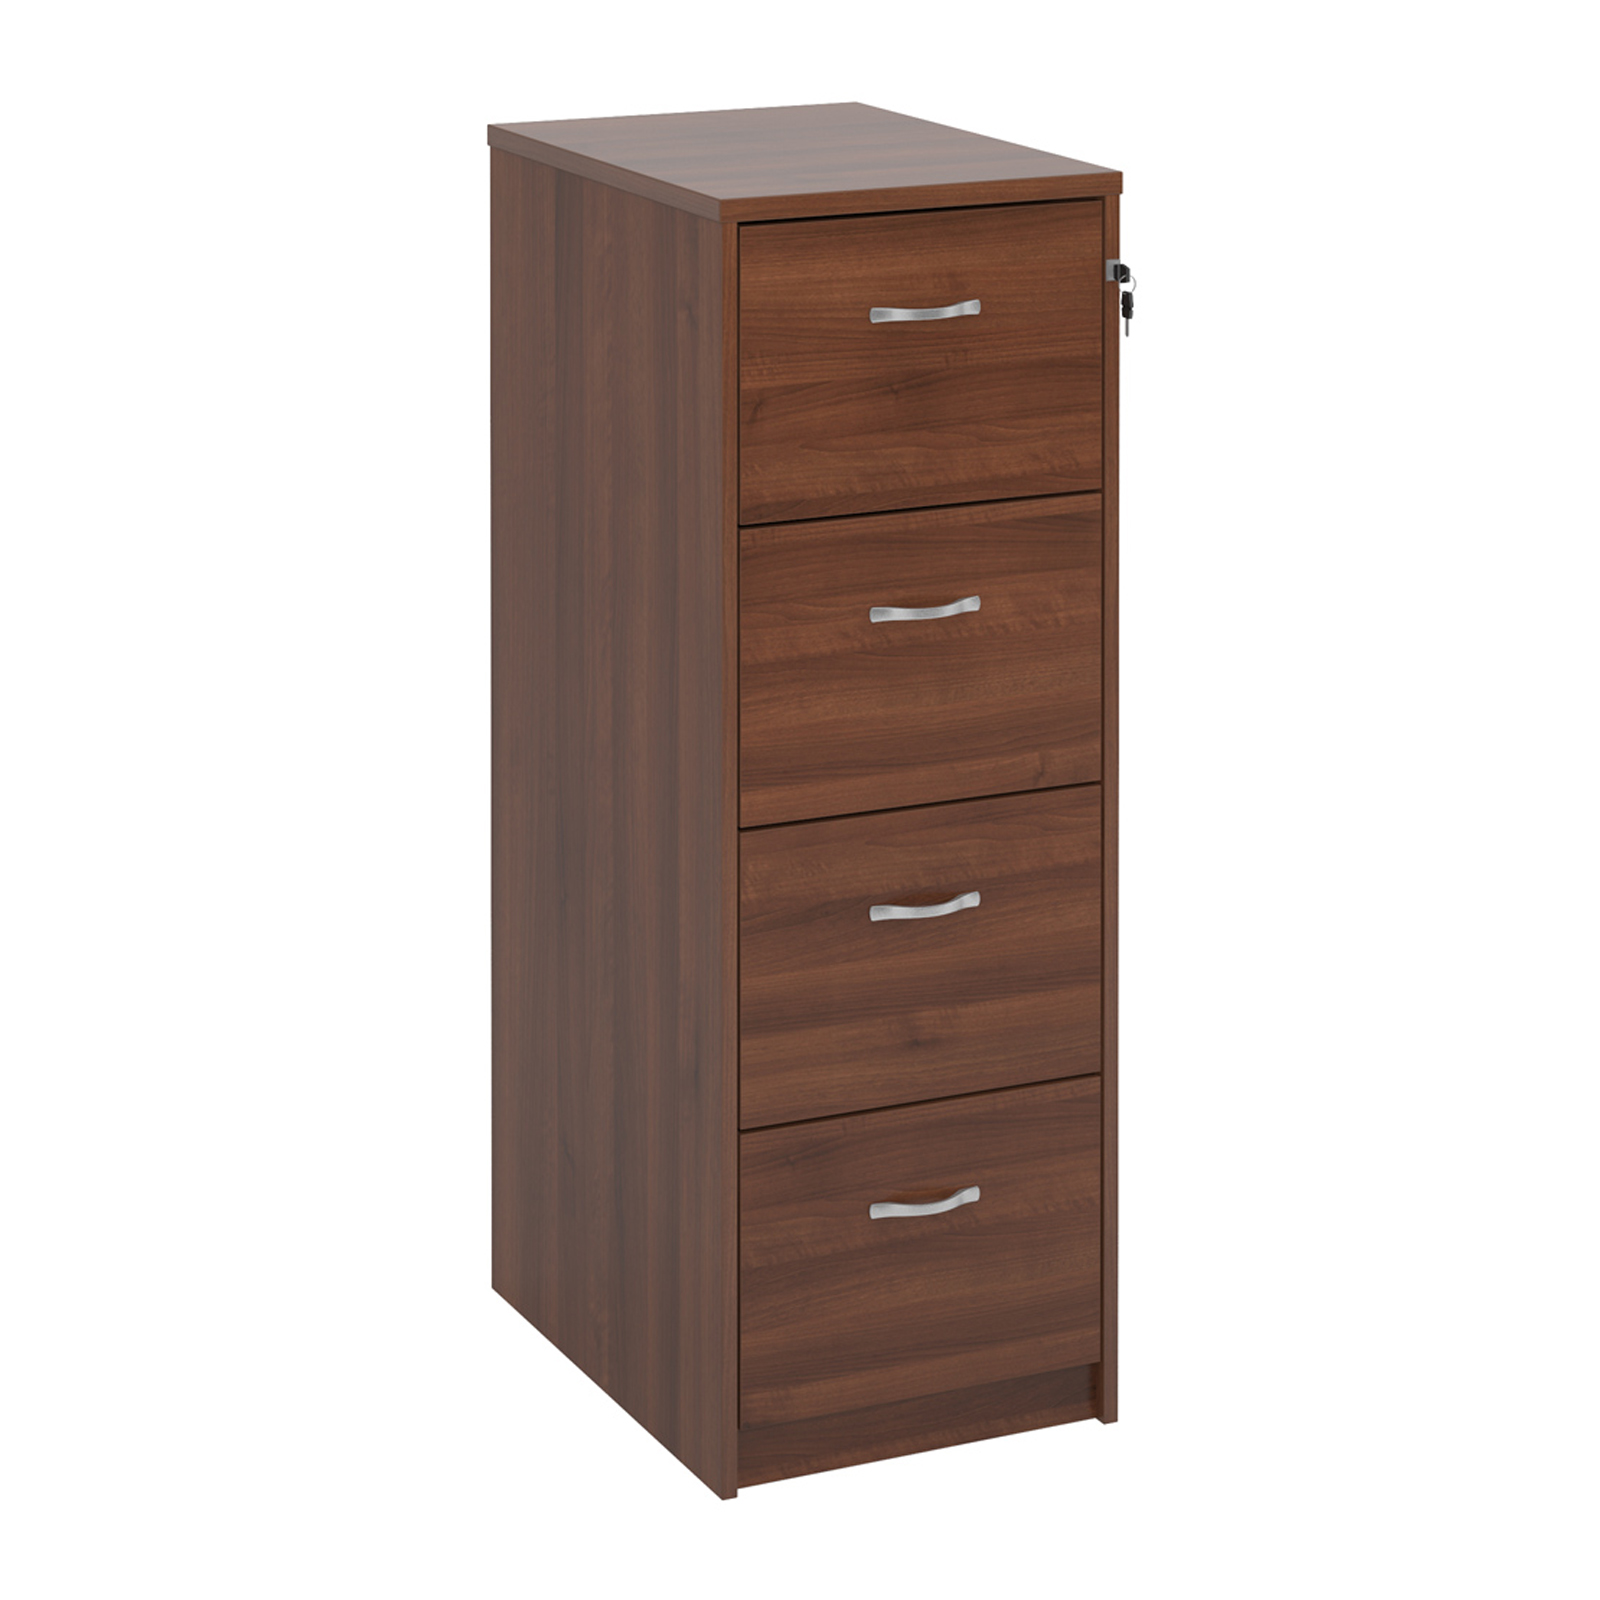 Wood Wooden 4 drawer filing cabinet with silver handles 1360mm high - walnut